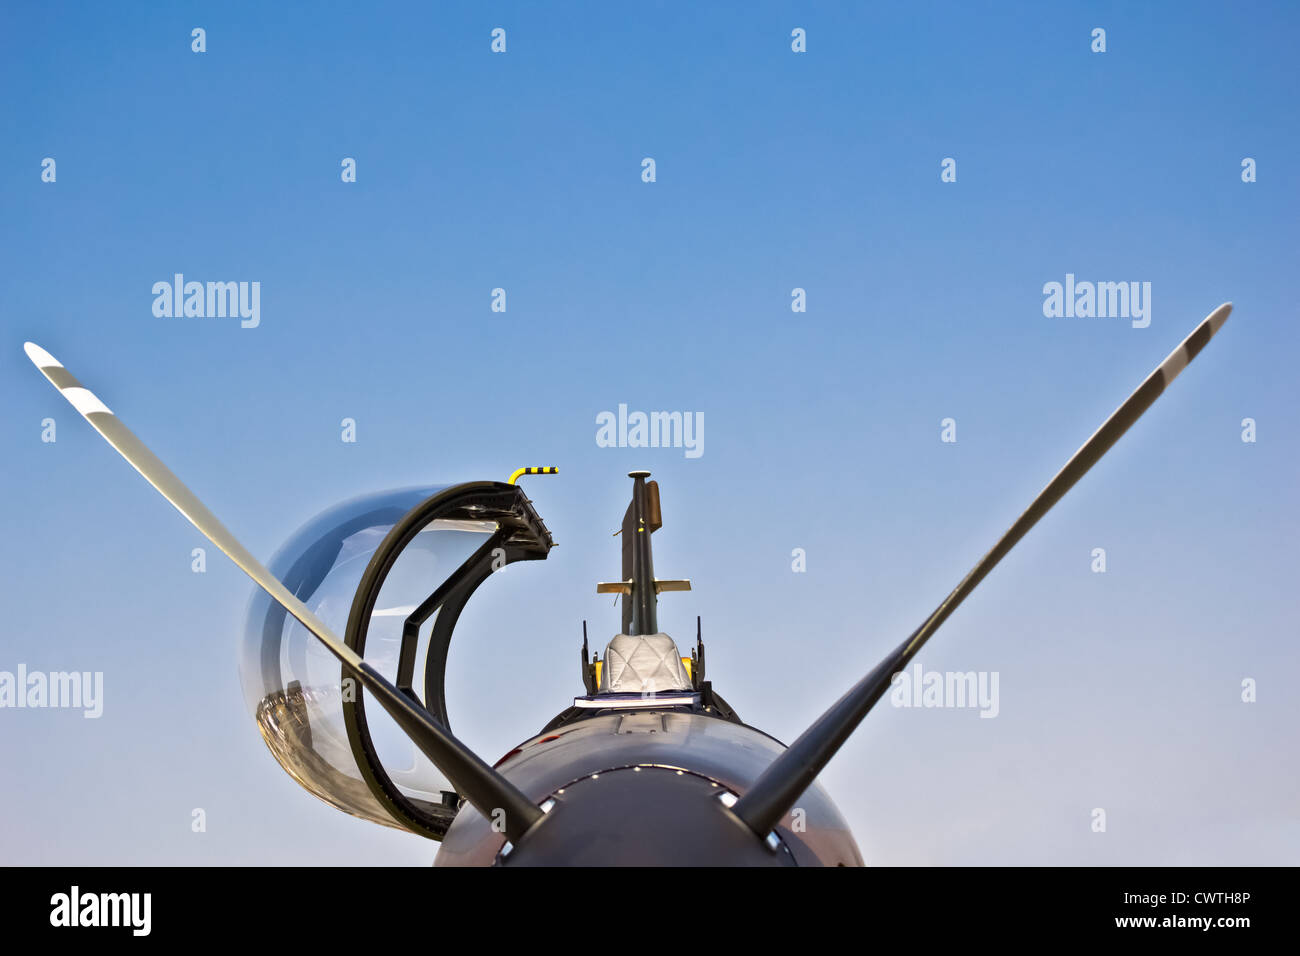 front view of propeller stunt airplane close up Stock Photo